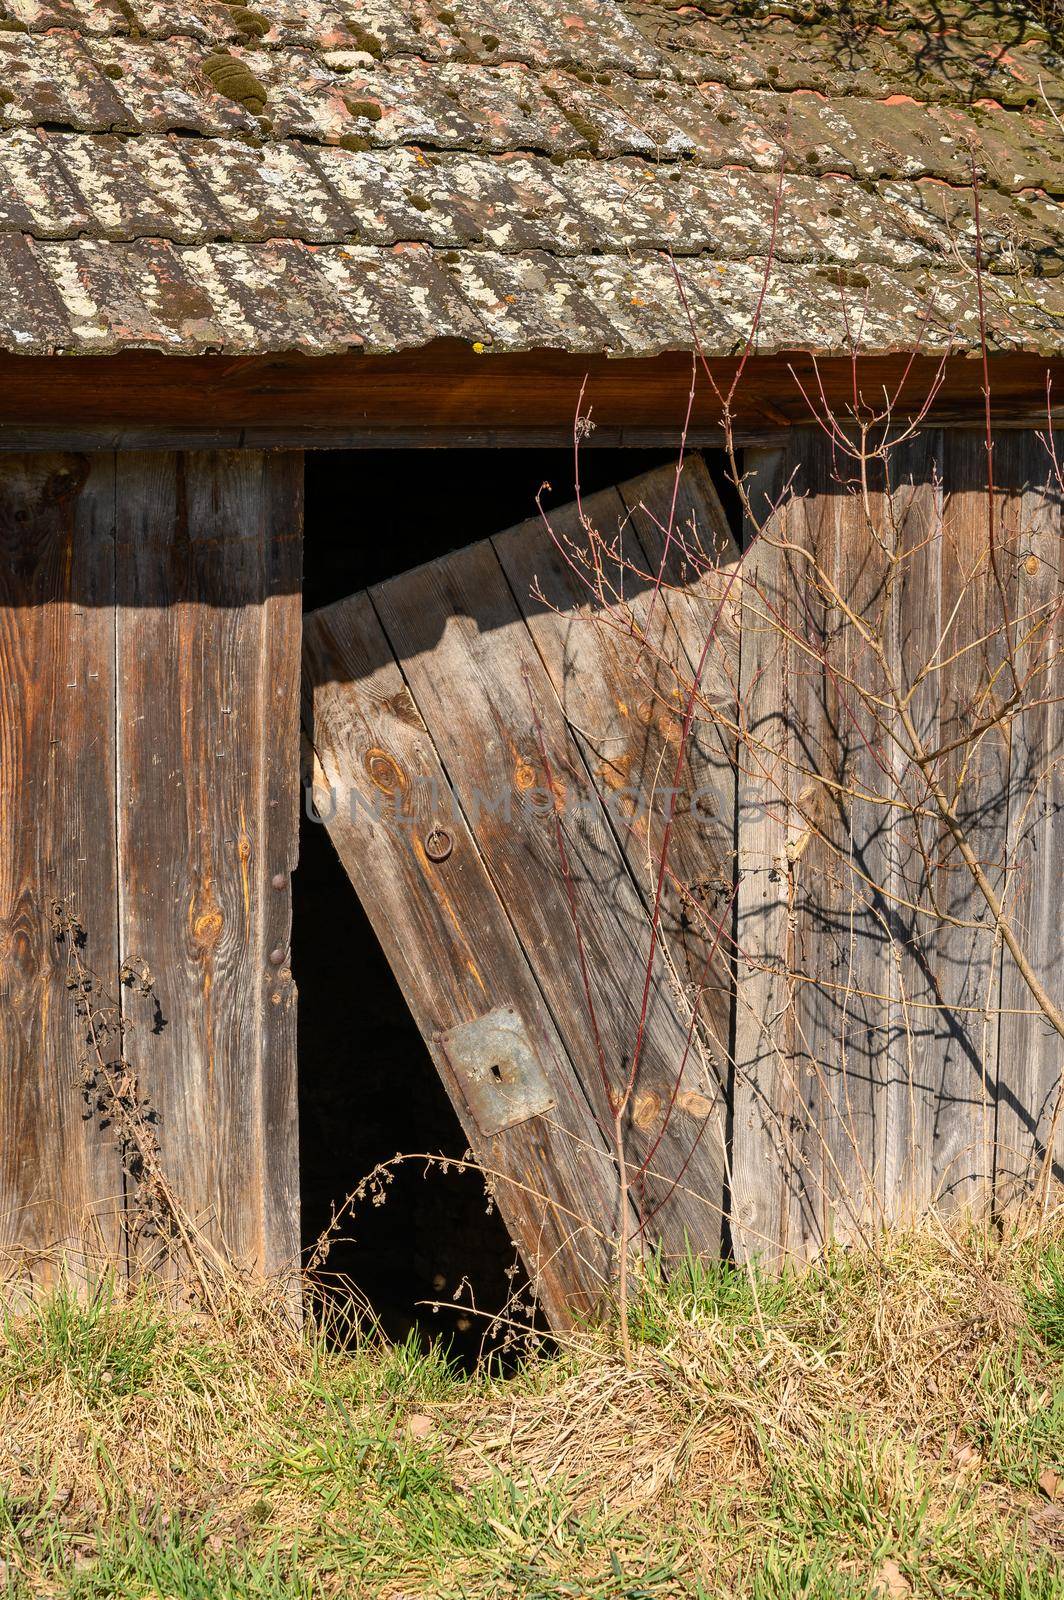 An old, half-dilapidated, abandoned and now overgrown wooden barn.